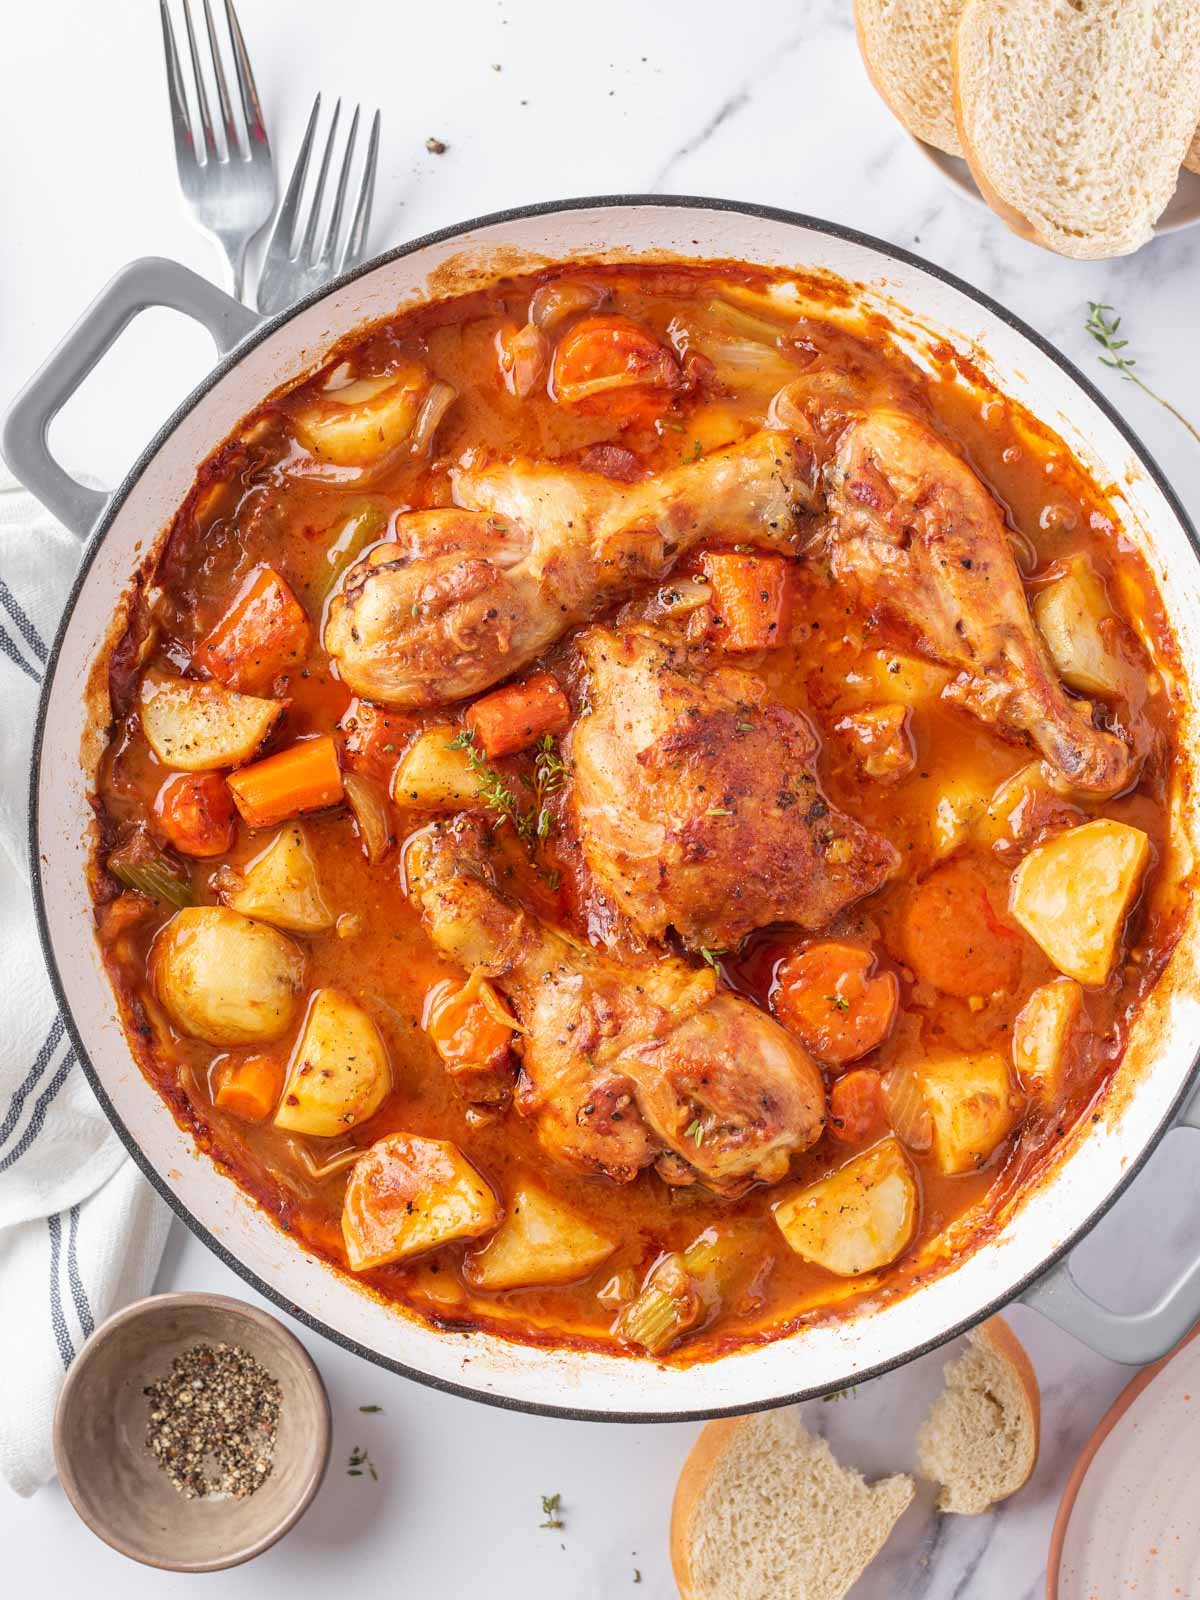 Easy chicken stew recipe with veggies in a skillet